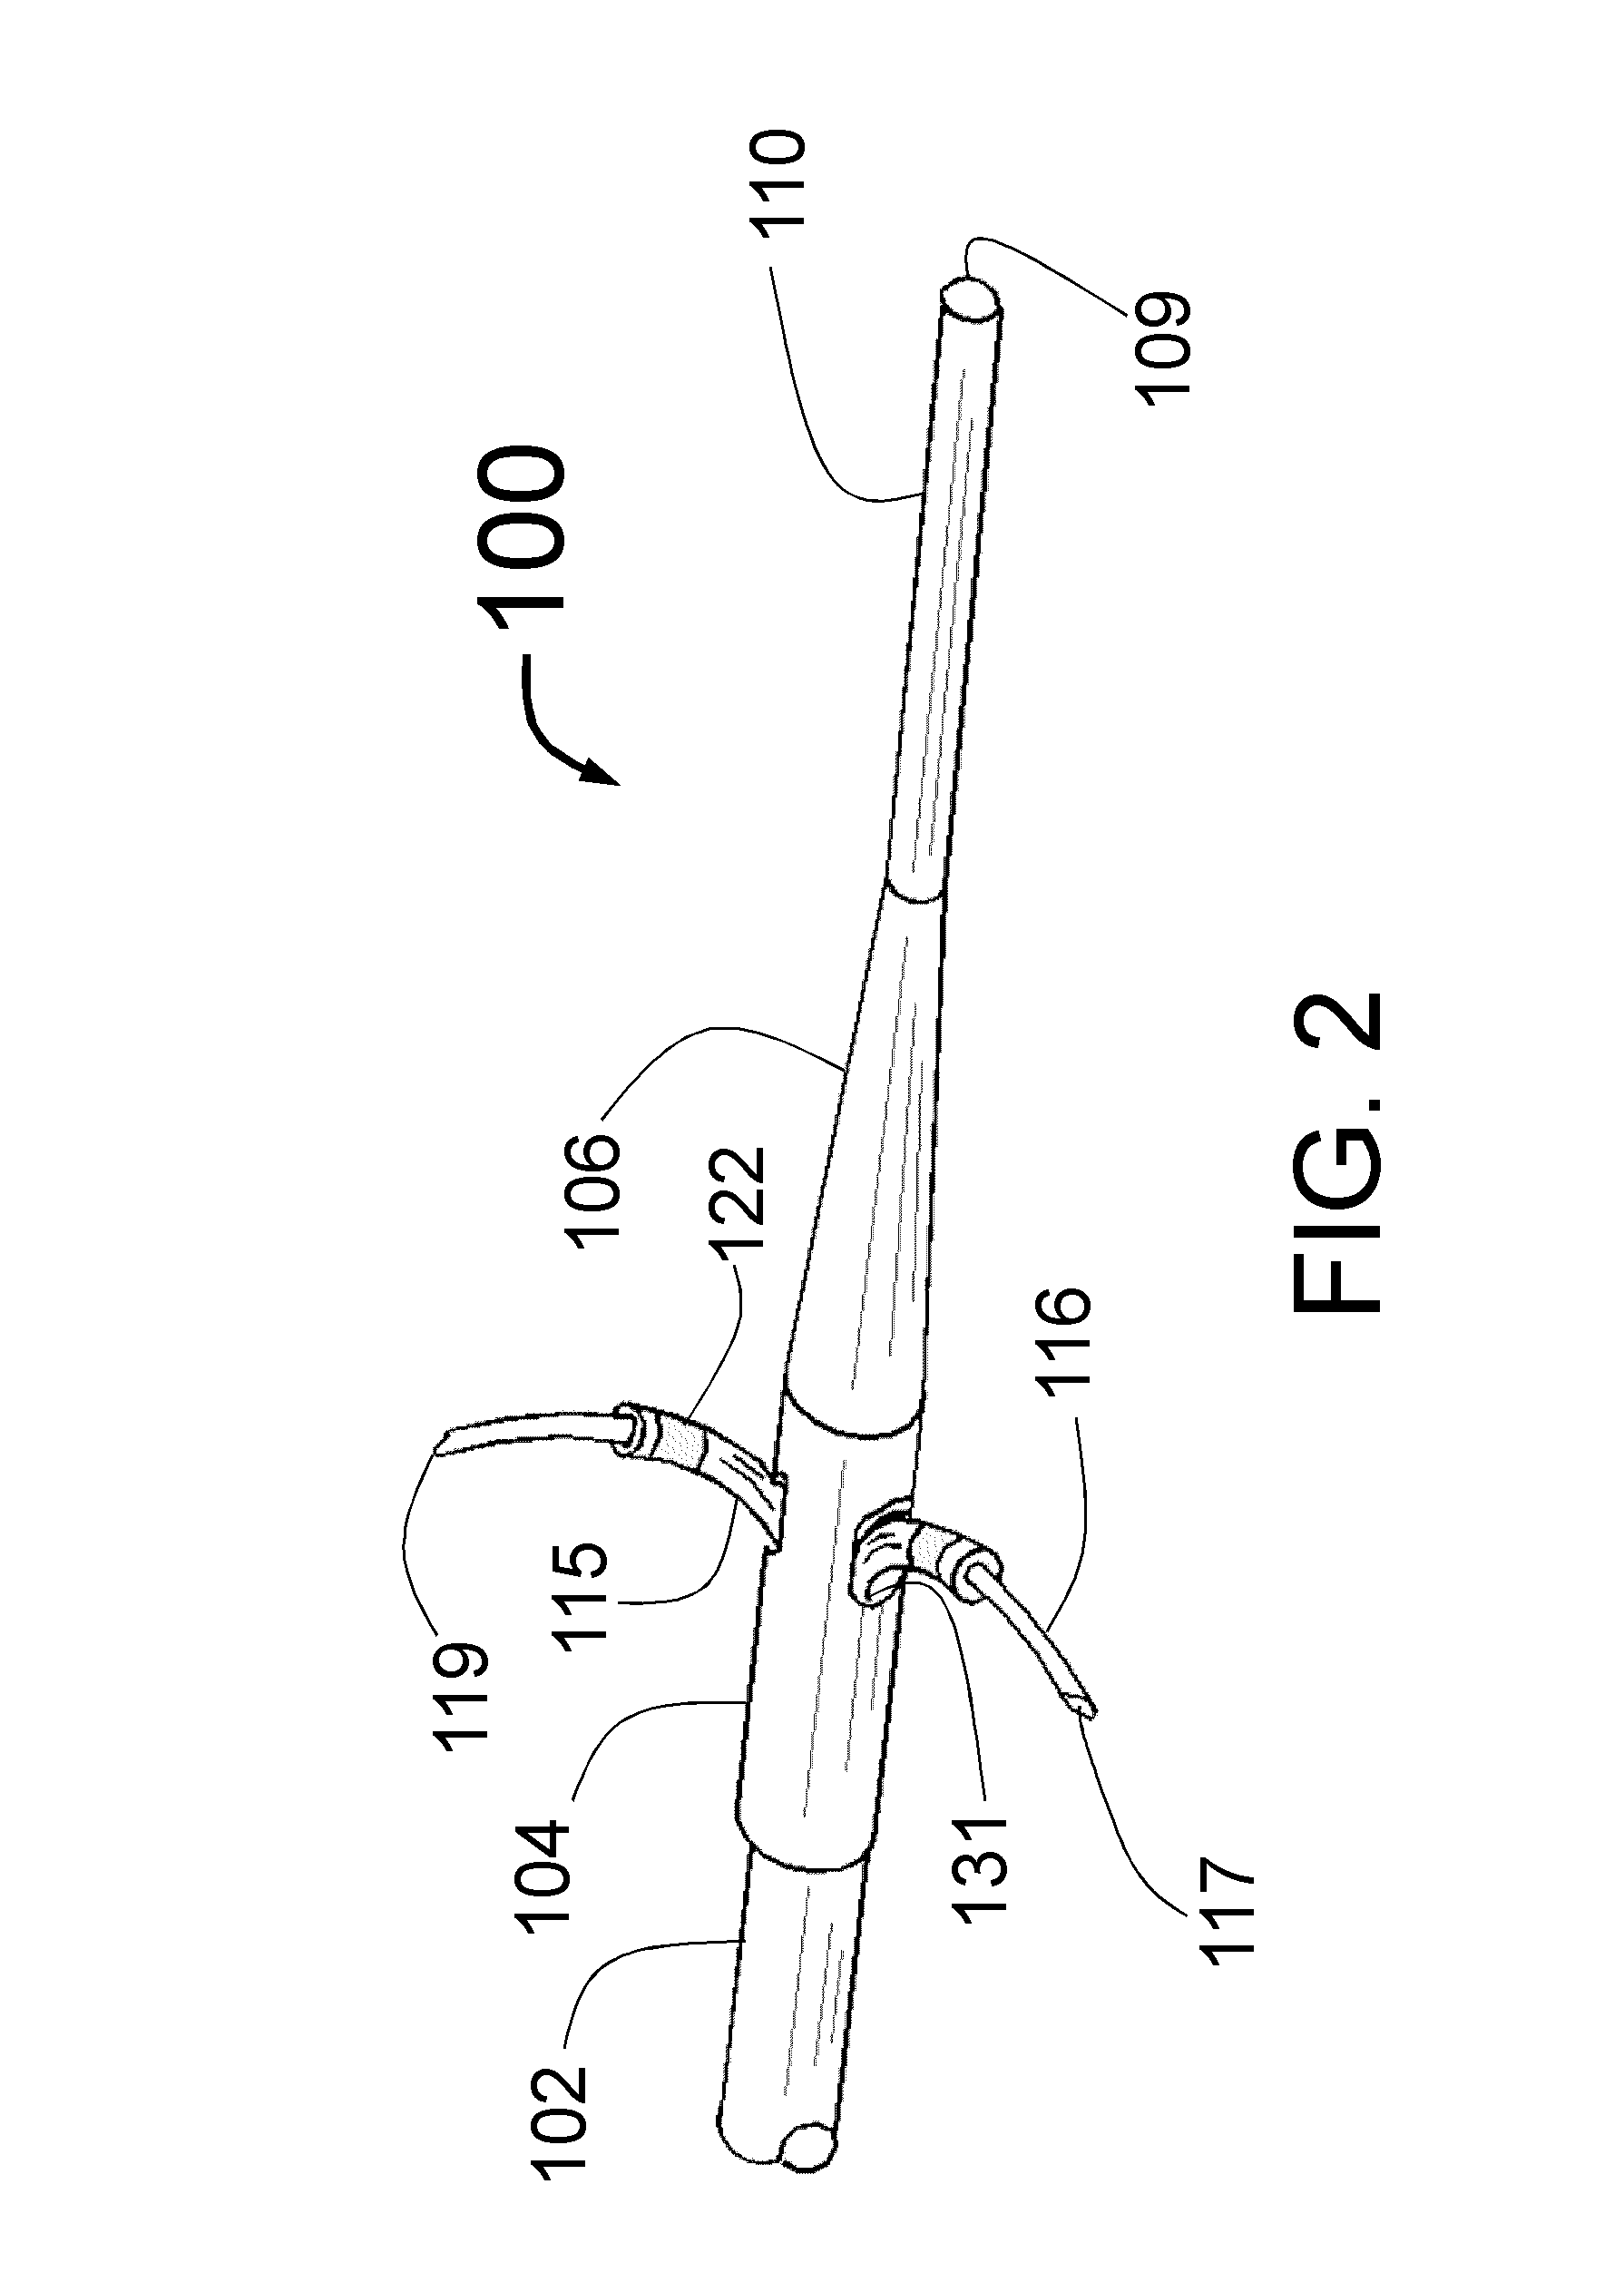 Peri-vascular tissue ablation catheter with support structures